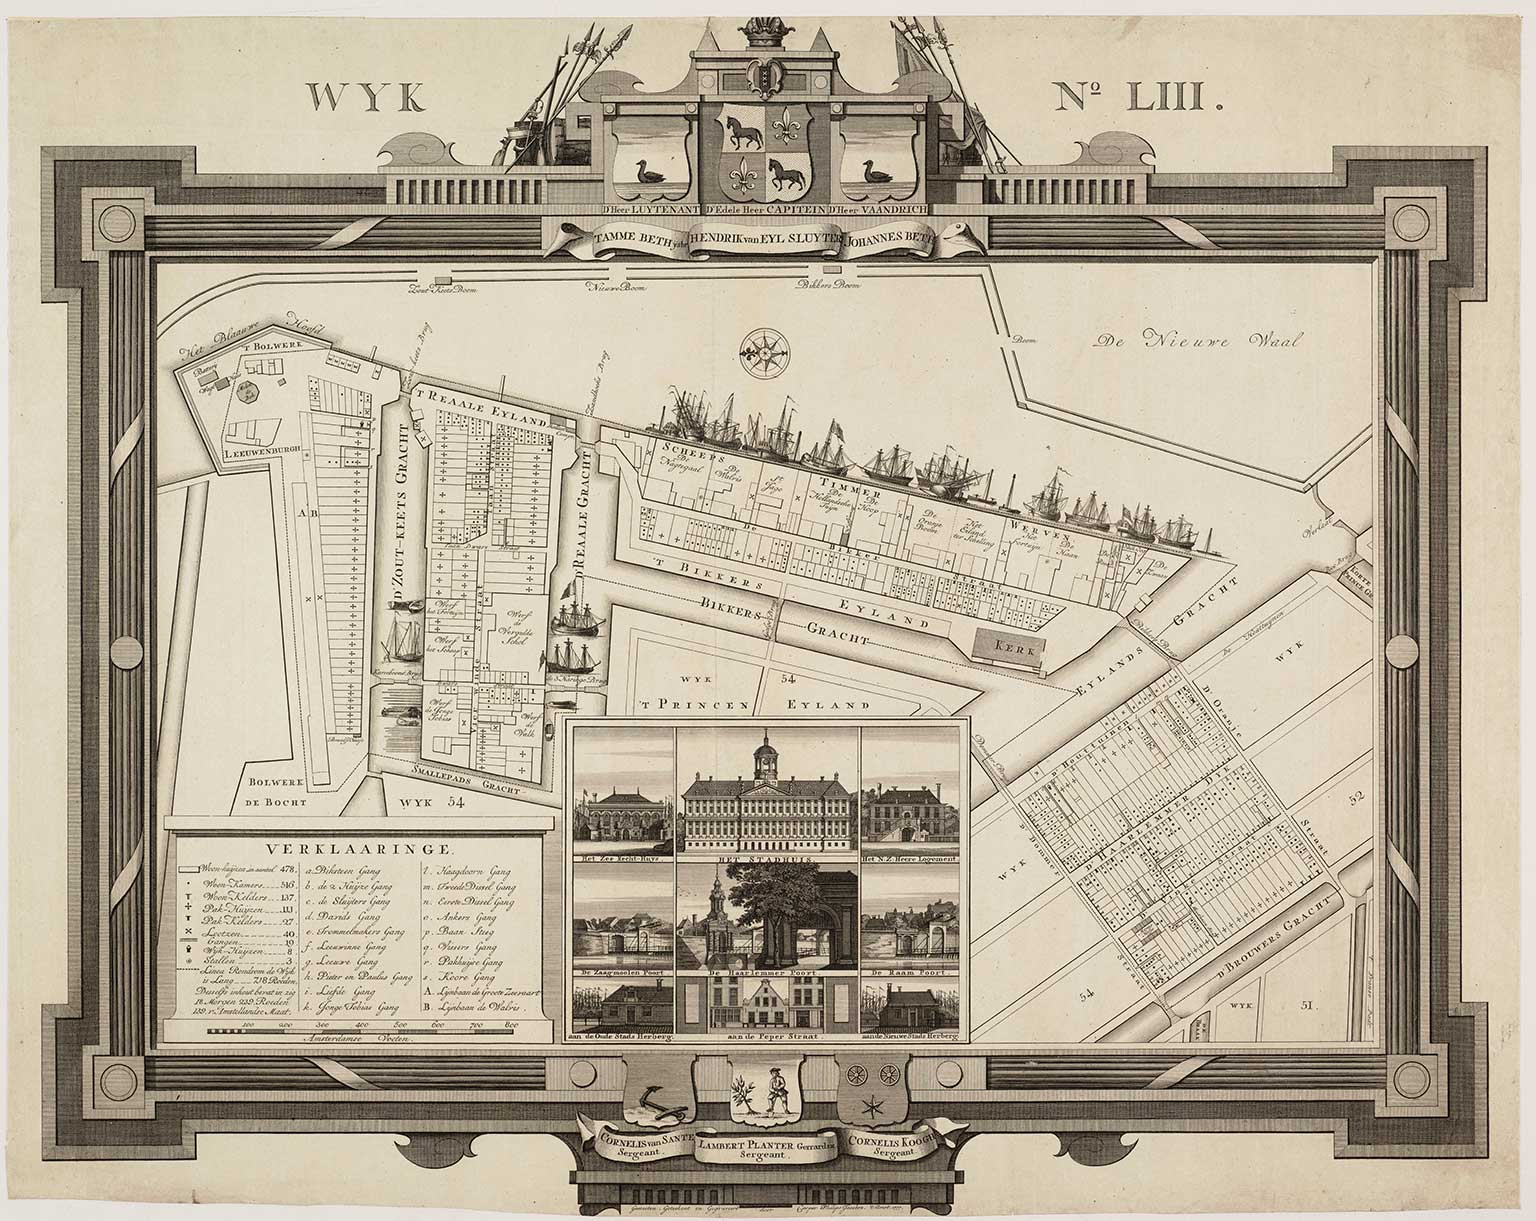 Map from 1777 showing the many shipyards owned by Bicker on Bickerseiland, Amsterdam